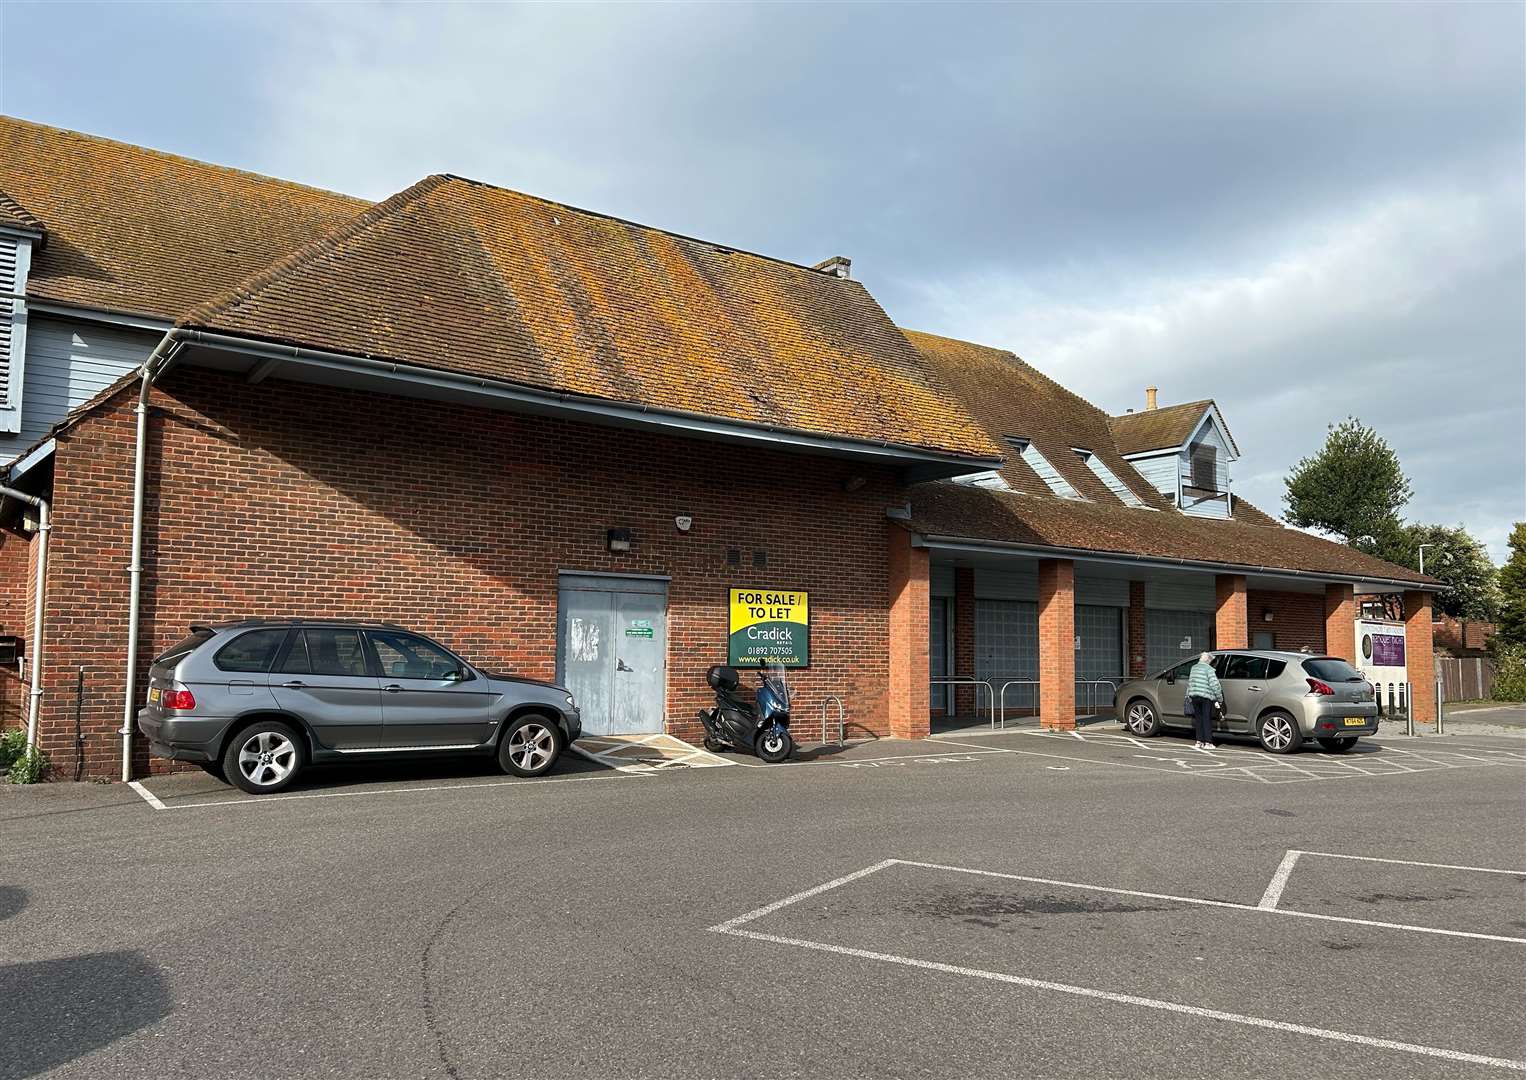 The former Aldi store in Hythe has been empty for four years